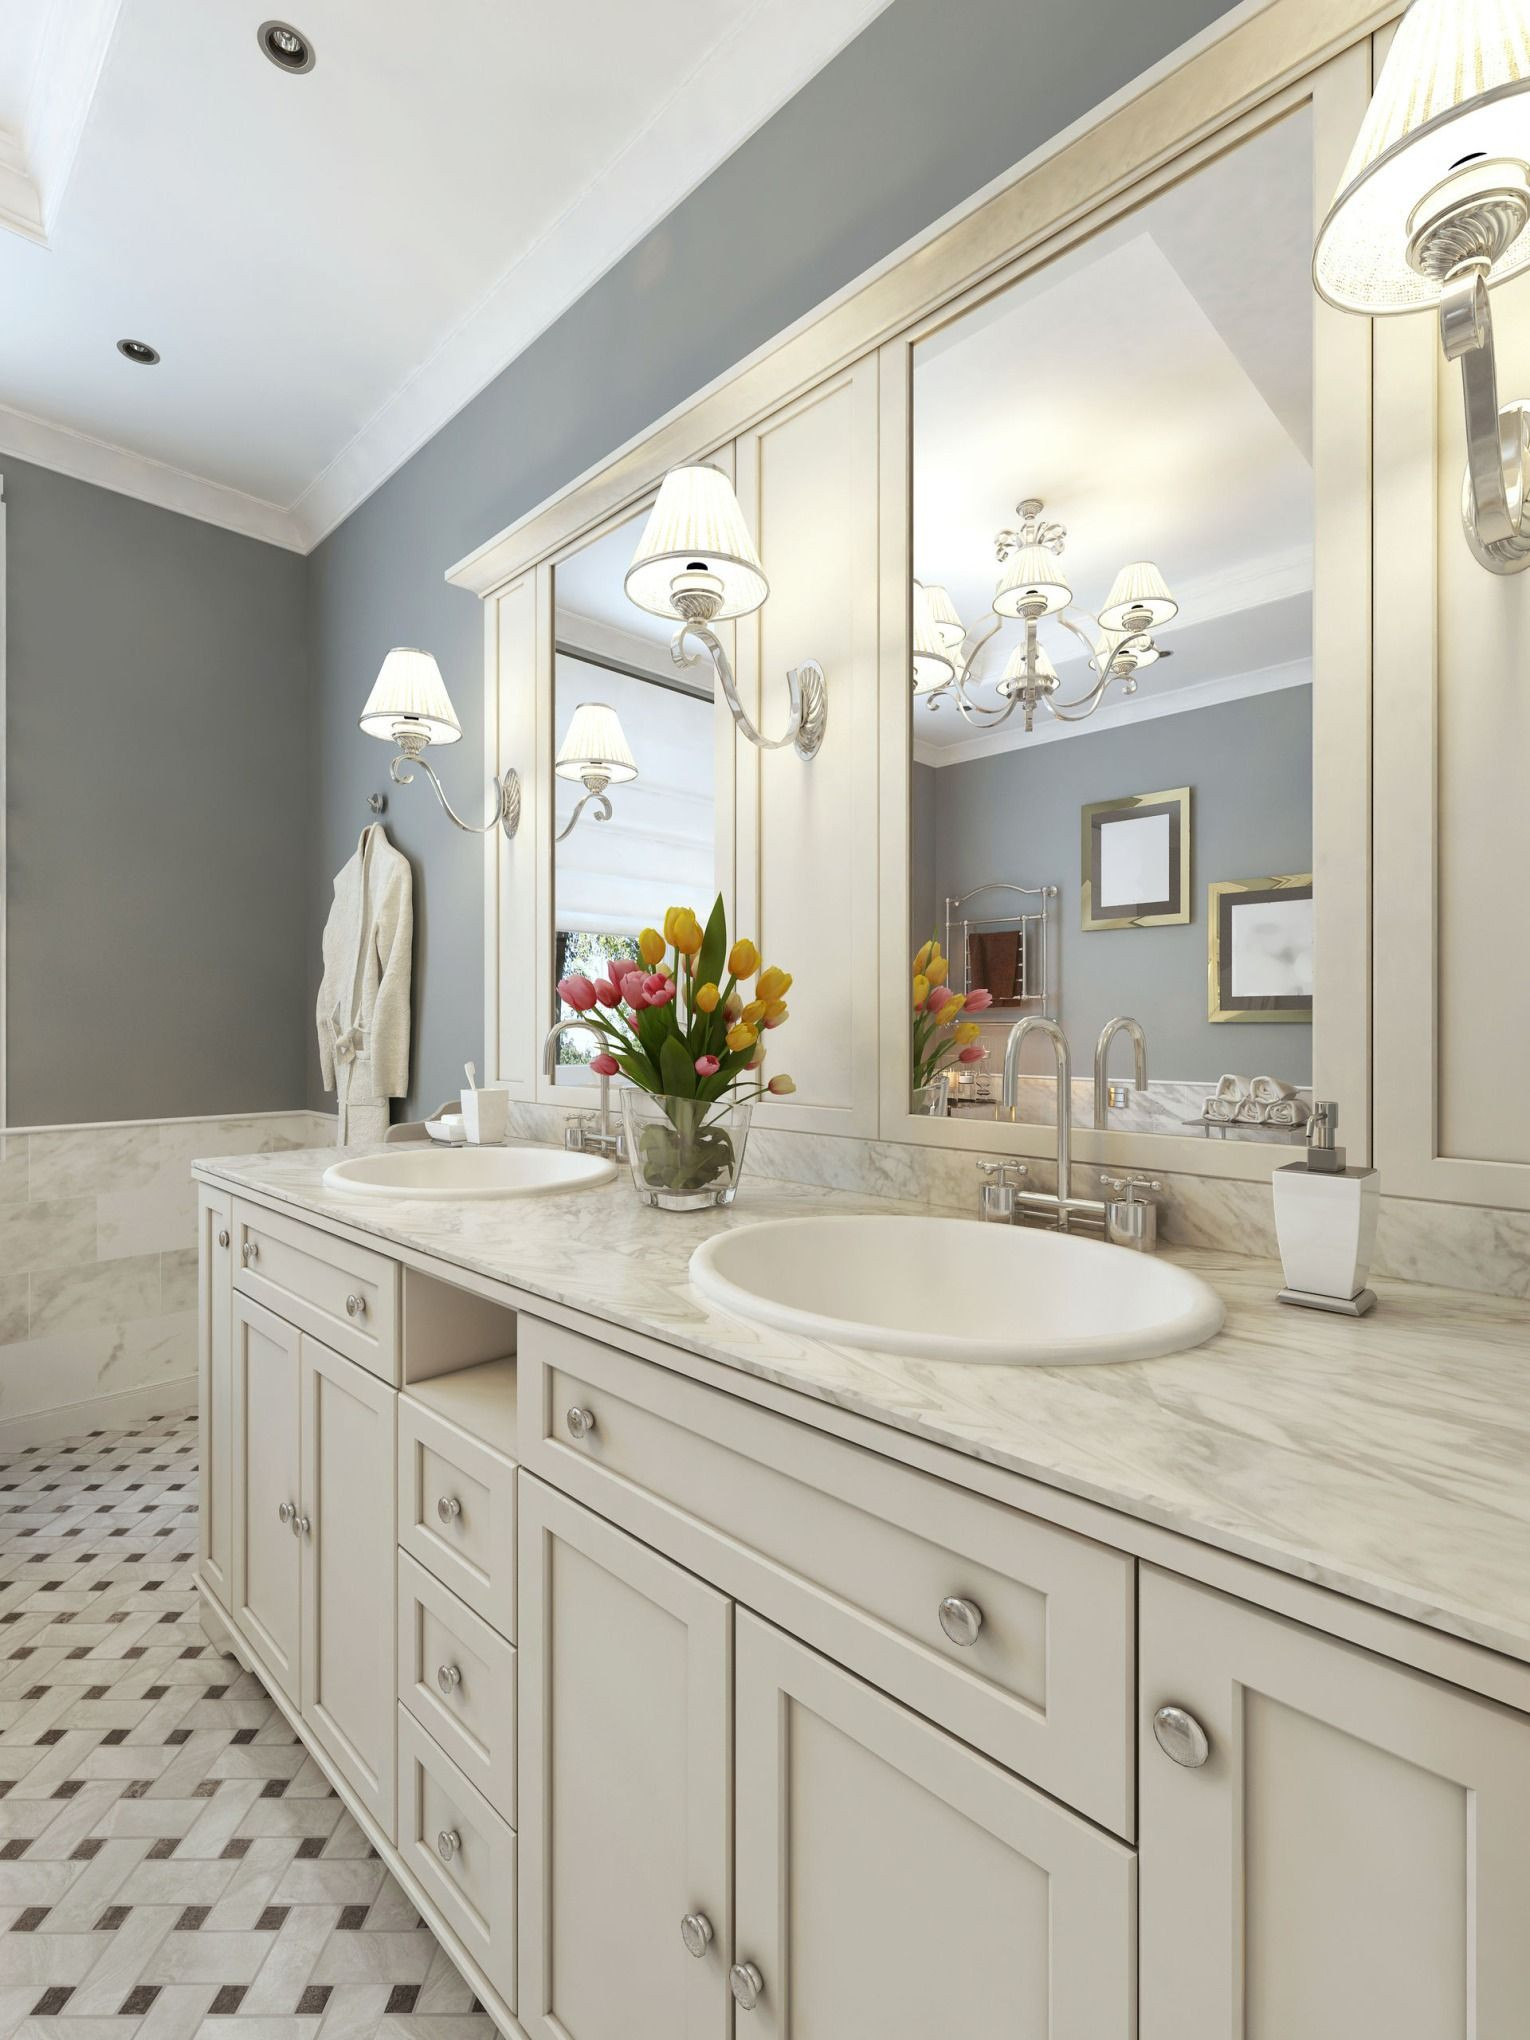 Recessed Lighting Over Bathroom Vanity
 Blog Post Bath Spaces 4 Thrifty Trends For Bathroom